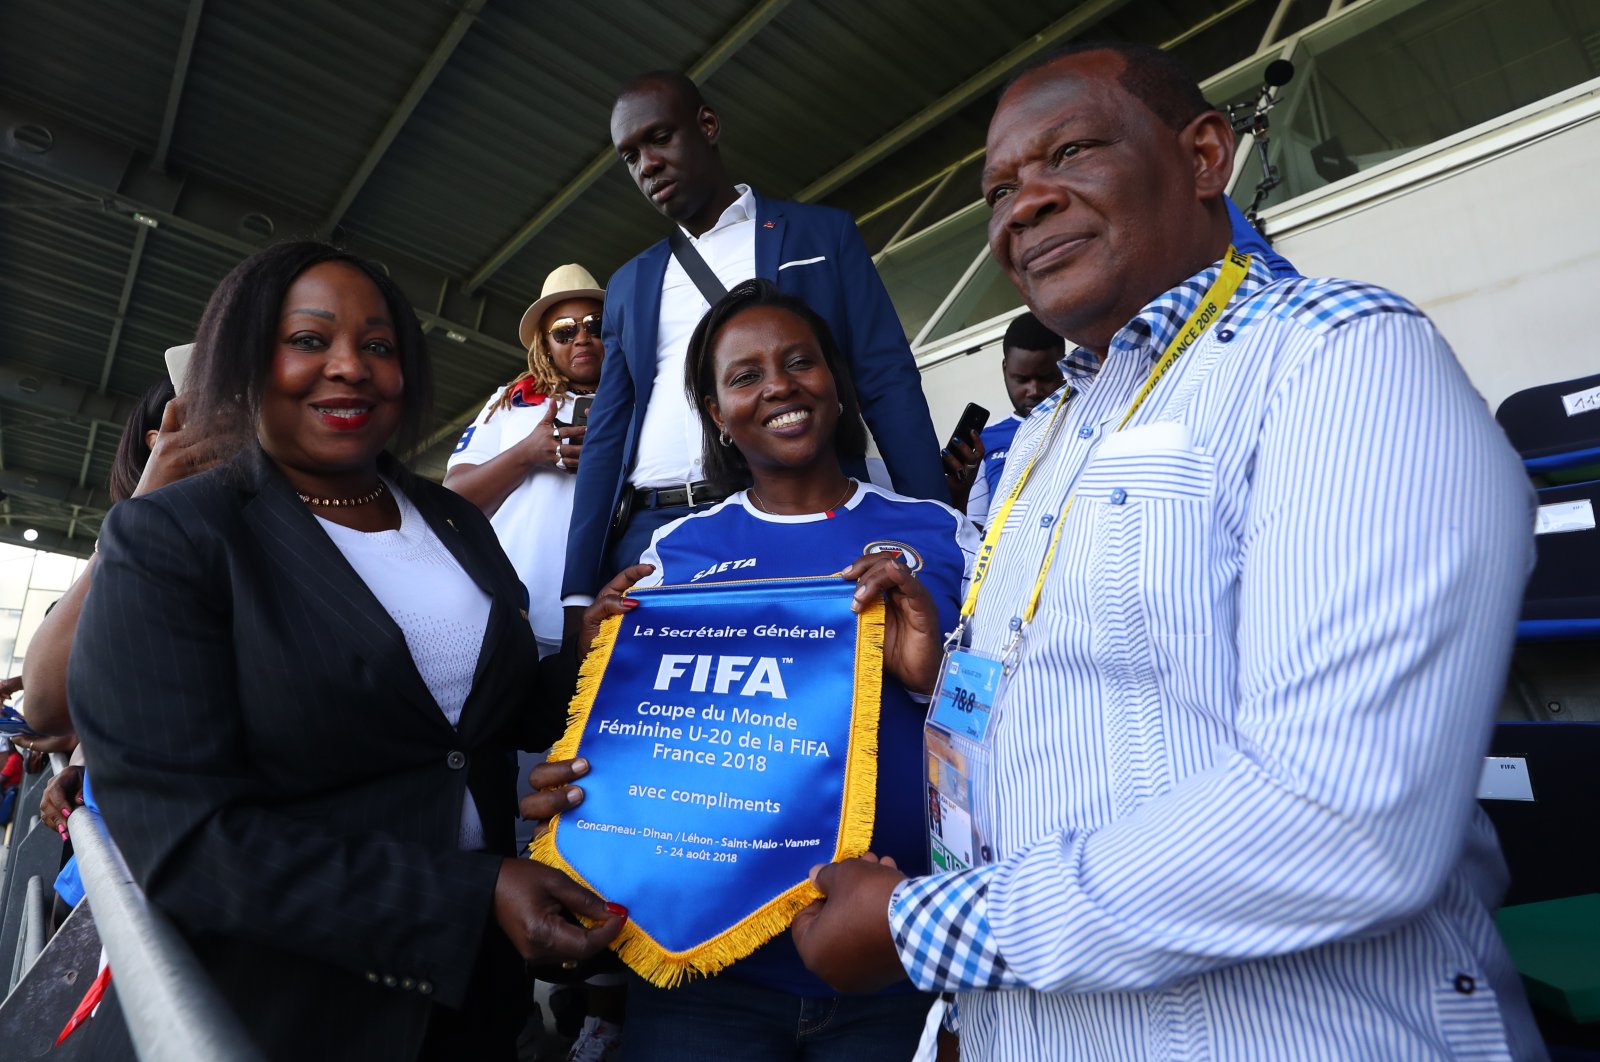 FIFA Secretary General Fatma Samoura (L) presents a pennant to Yves Jean-Bart (R), president of the Haiti Football Association, during the FIFA U-20 Women&#039;s World Cup France 2018 group D match between Haiti and China, Saint-Malo, France, Aug. 6, 2018. (Getty Images Photo)